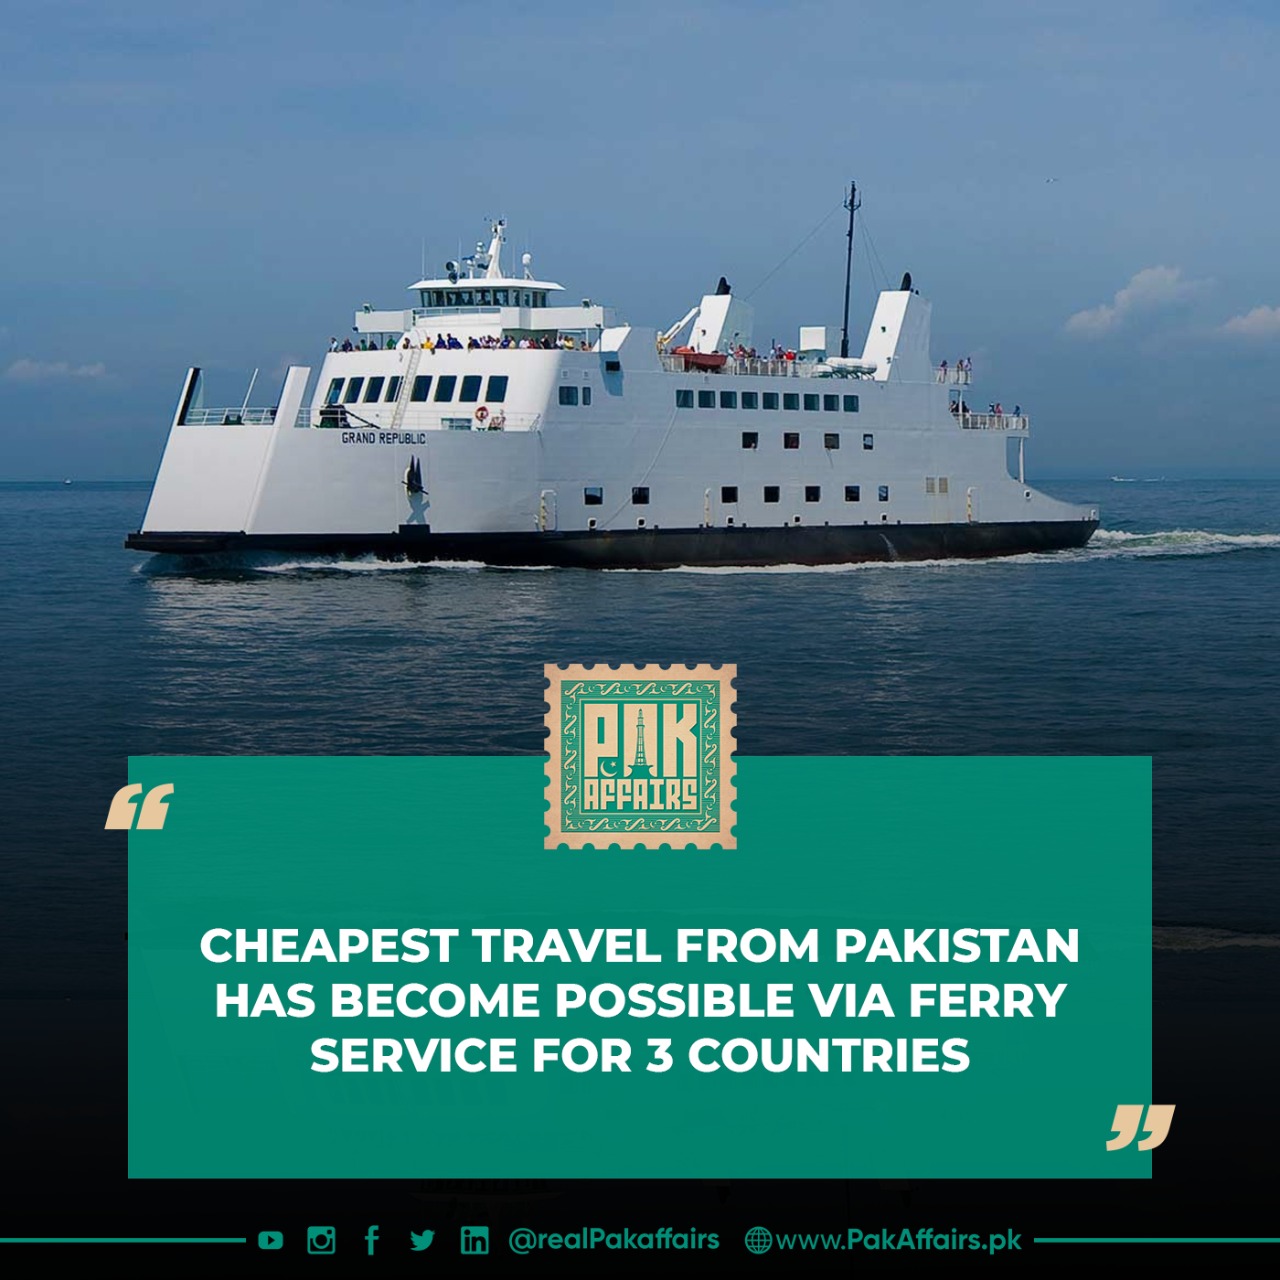 Cheapest travel from Pakistan has become possible via ferry service for 3 countries.